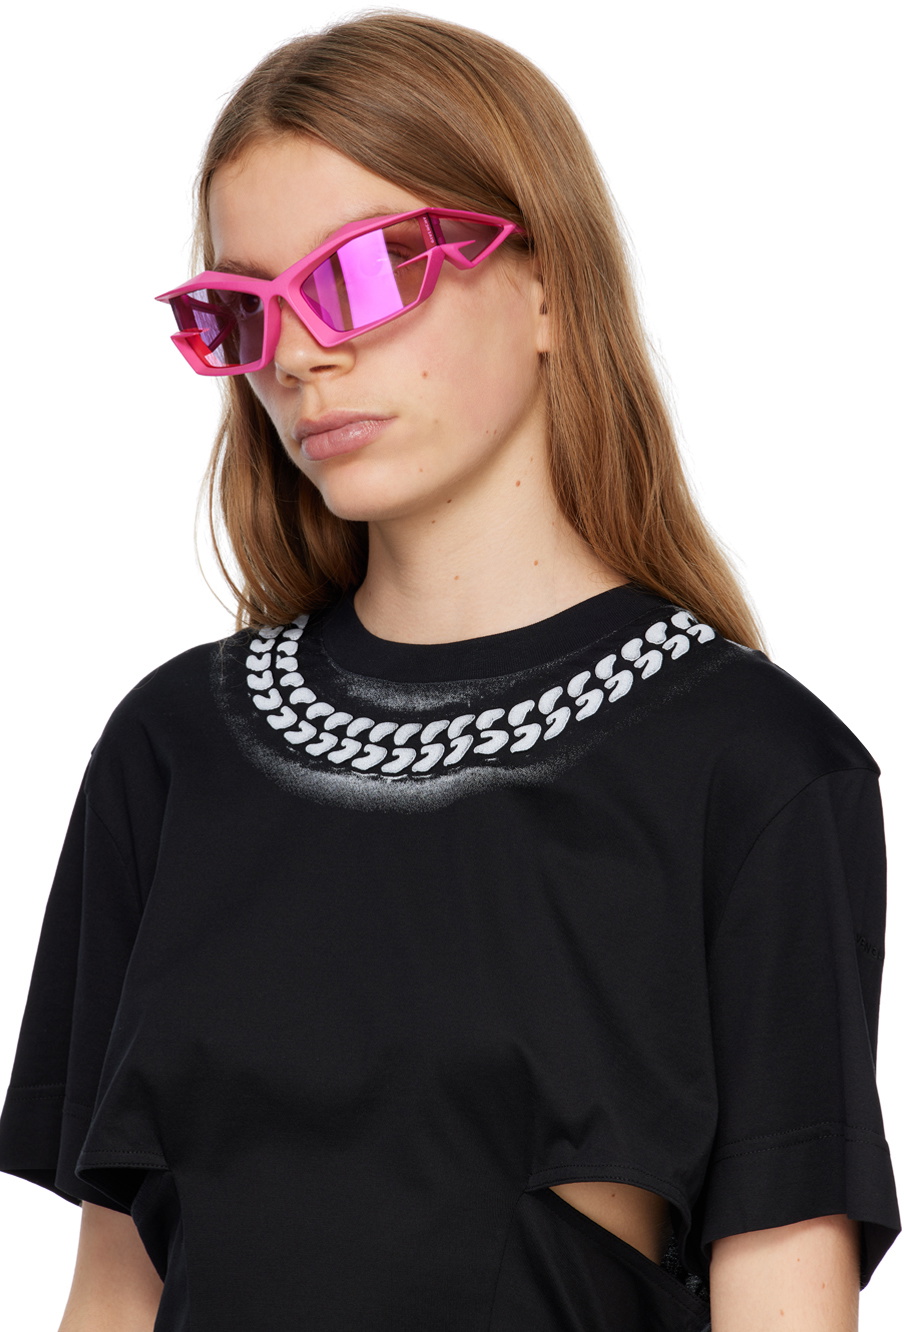 GV Day Cat Eye Sunglasses in Pink - Givenchy